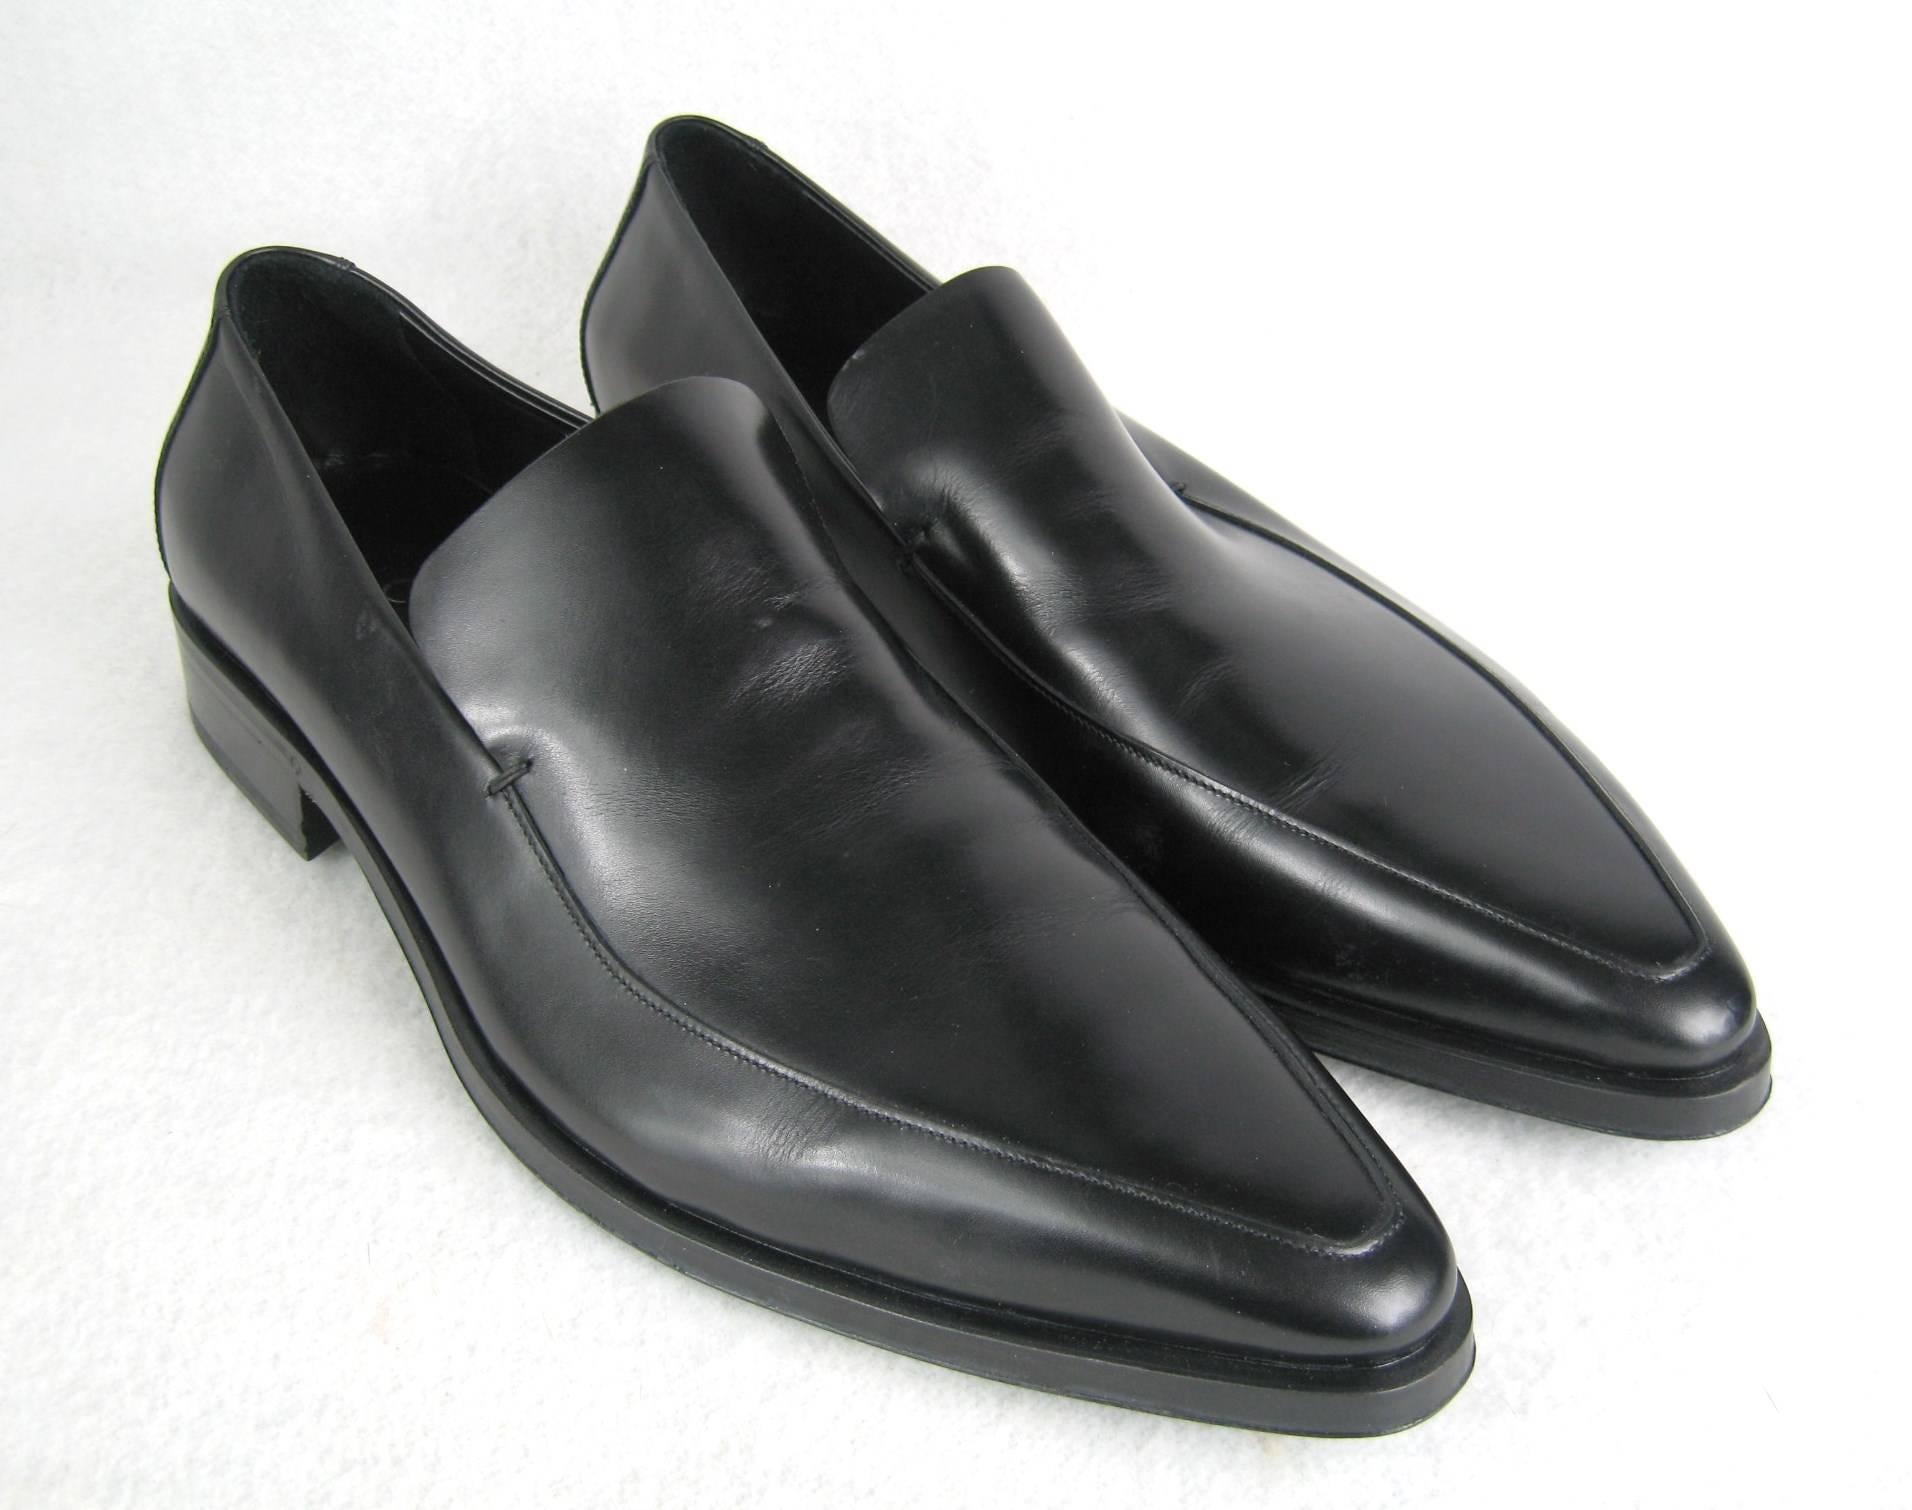 New, never worn. Gucci Black Leather size 13 D Men's Shoes. Box has a bit of wear. This is out of a massive collection of New Old stock items as well as  Hopi, Zuni, Navajo, Southwestern, sterling silver, (costume jewelry that was not worn)  and